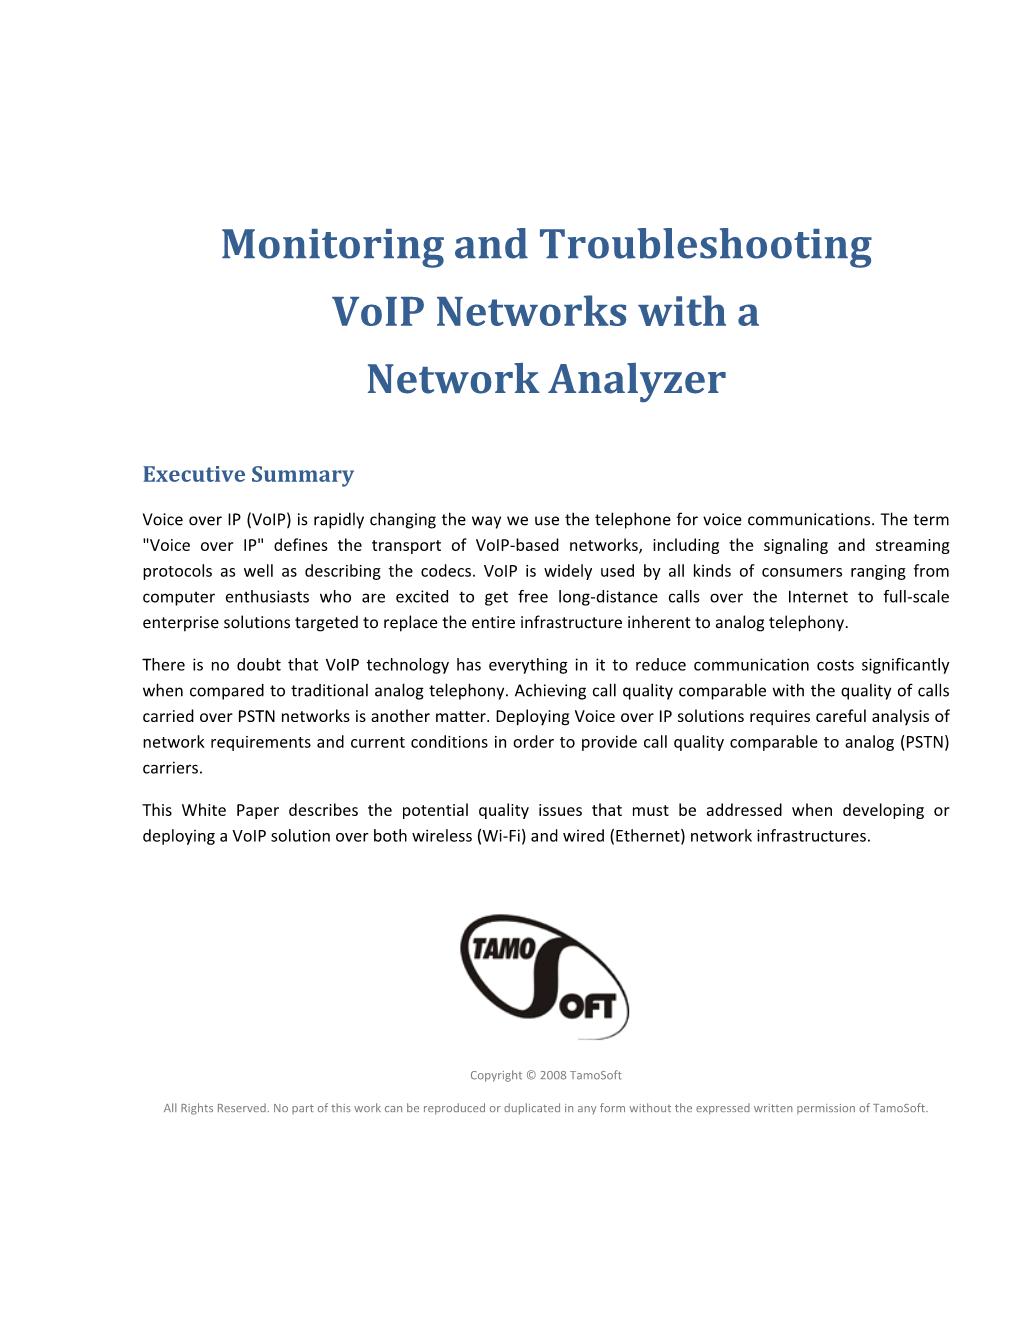 Monitoring and Troubleshooting Voip Networks with a Network Analyzer